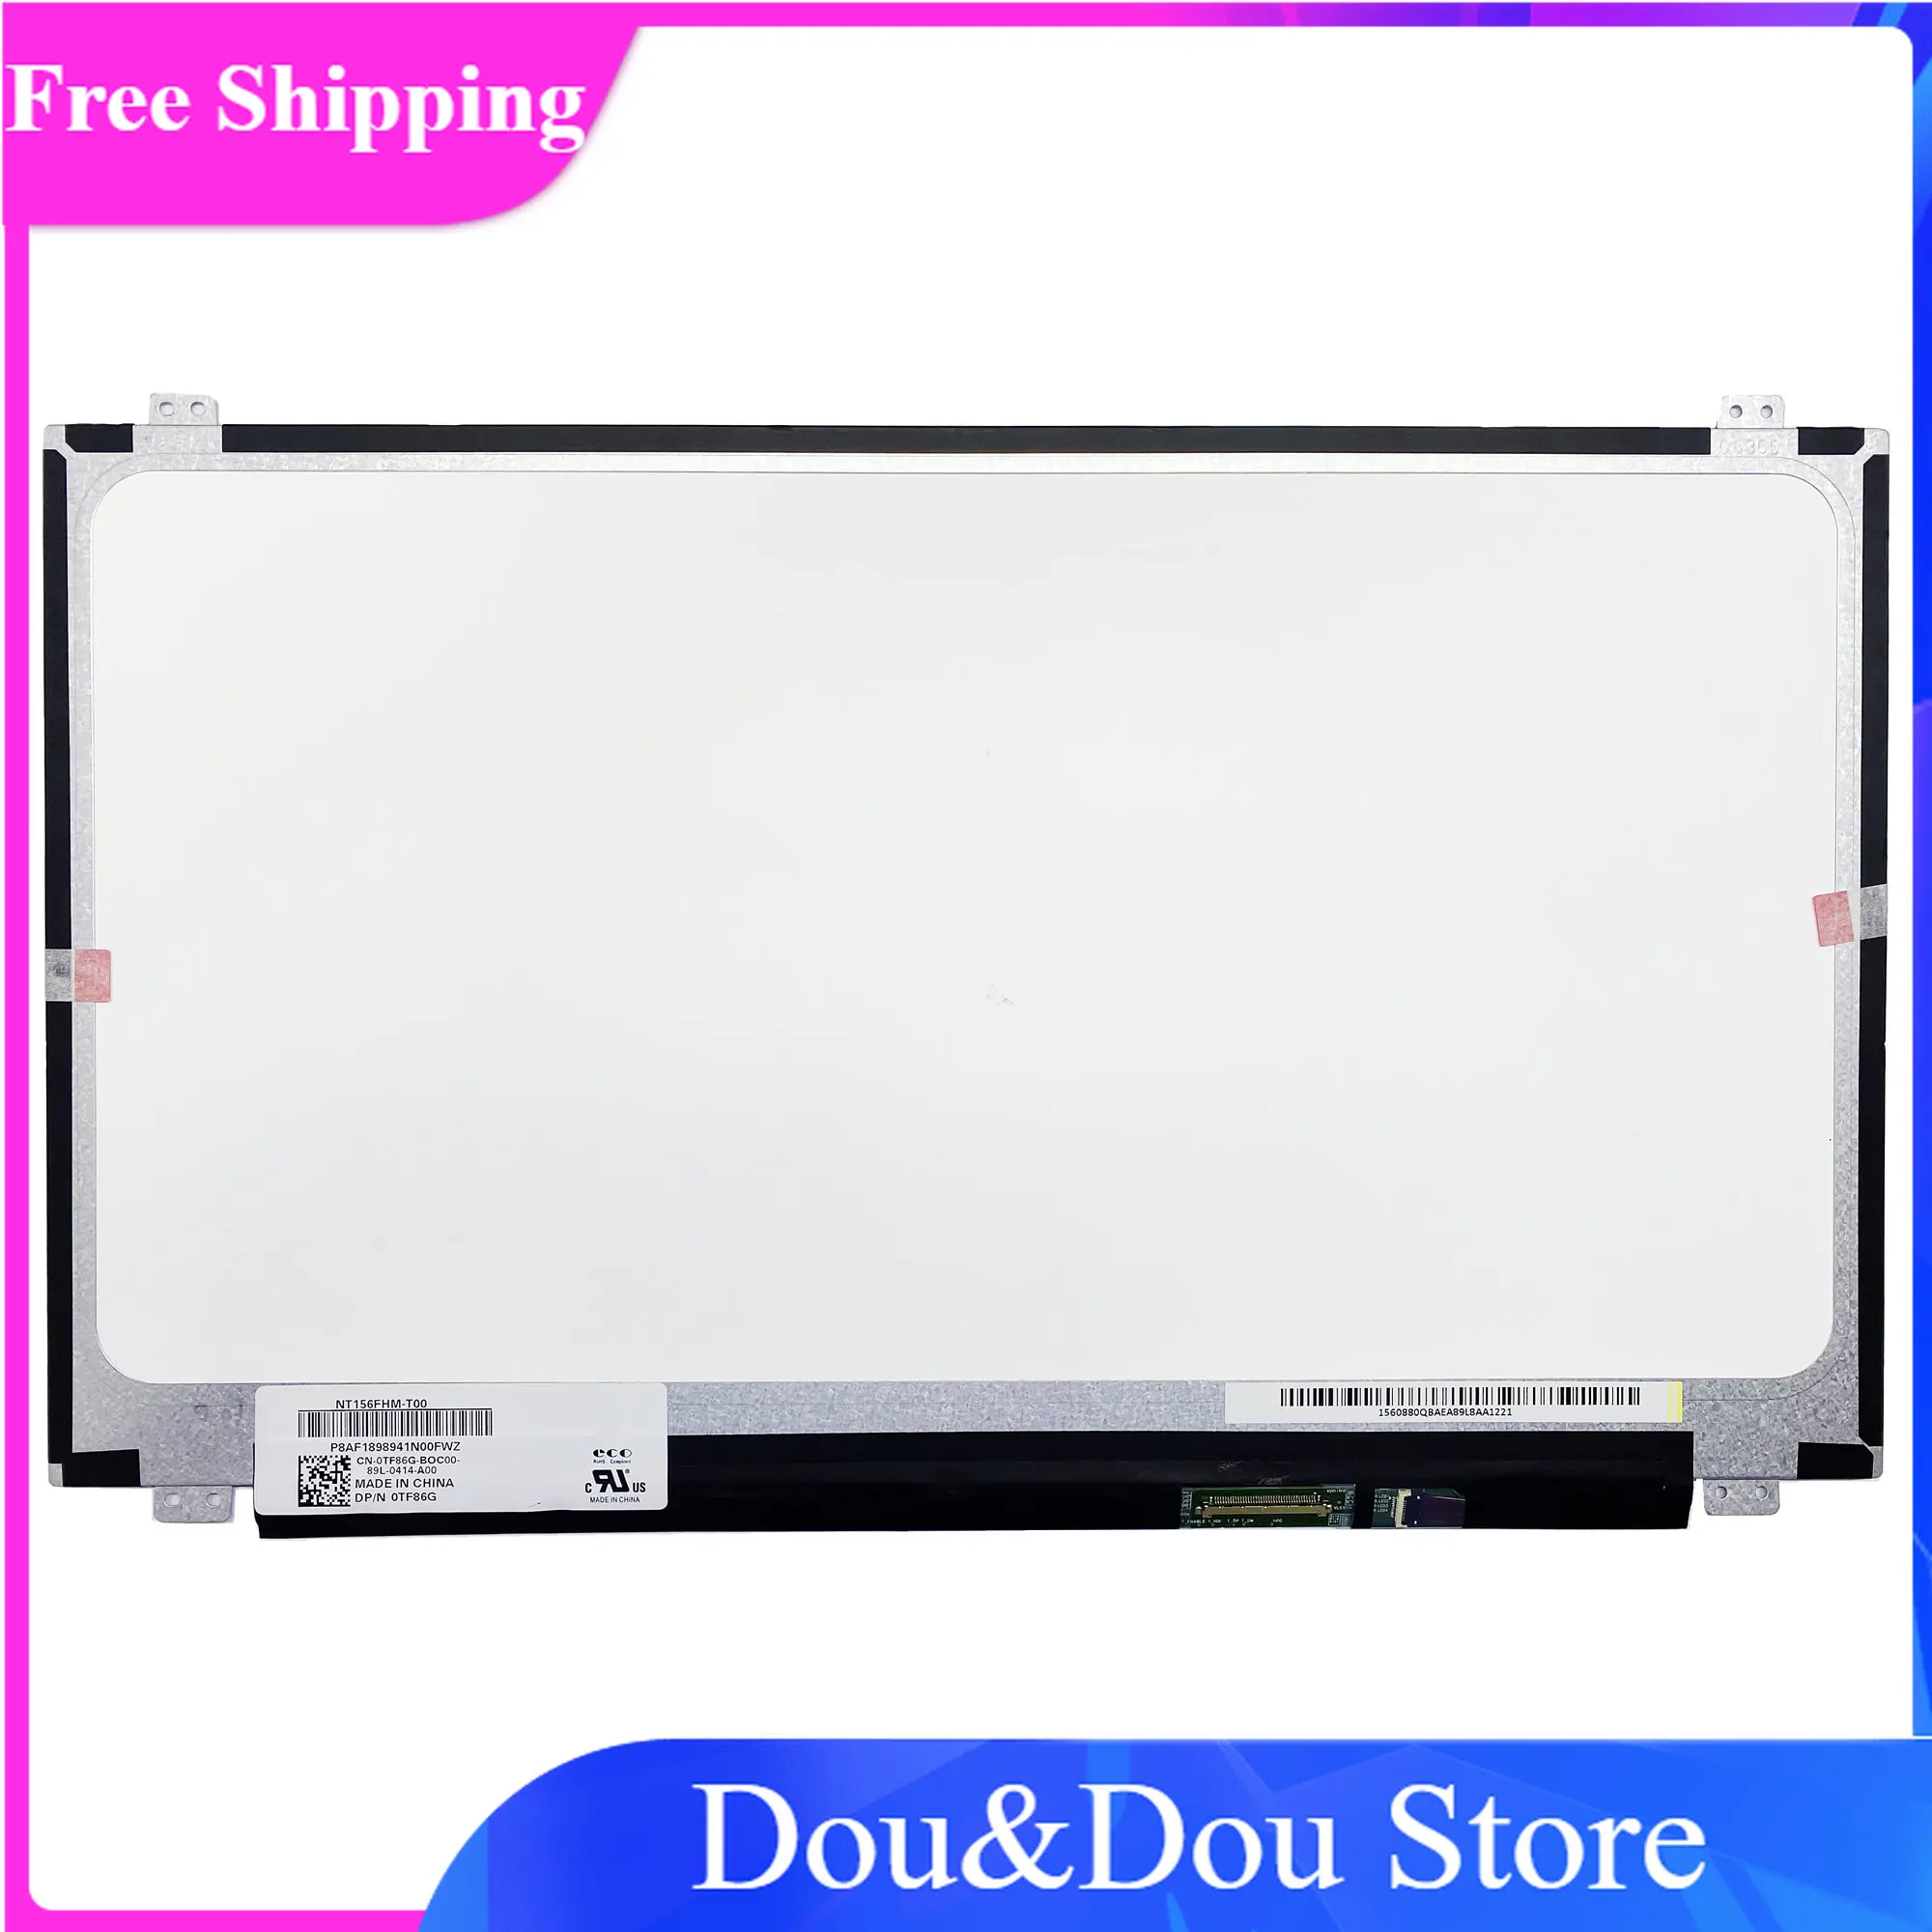 

NT156FHM-T00 FHD For Dell Inspiron 15 5570 5575 Matrix Display Panel 15.6" 1920x1080 EDP 40Pins Laptop LCD Touch Screen